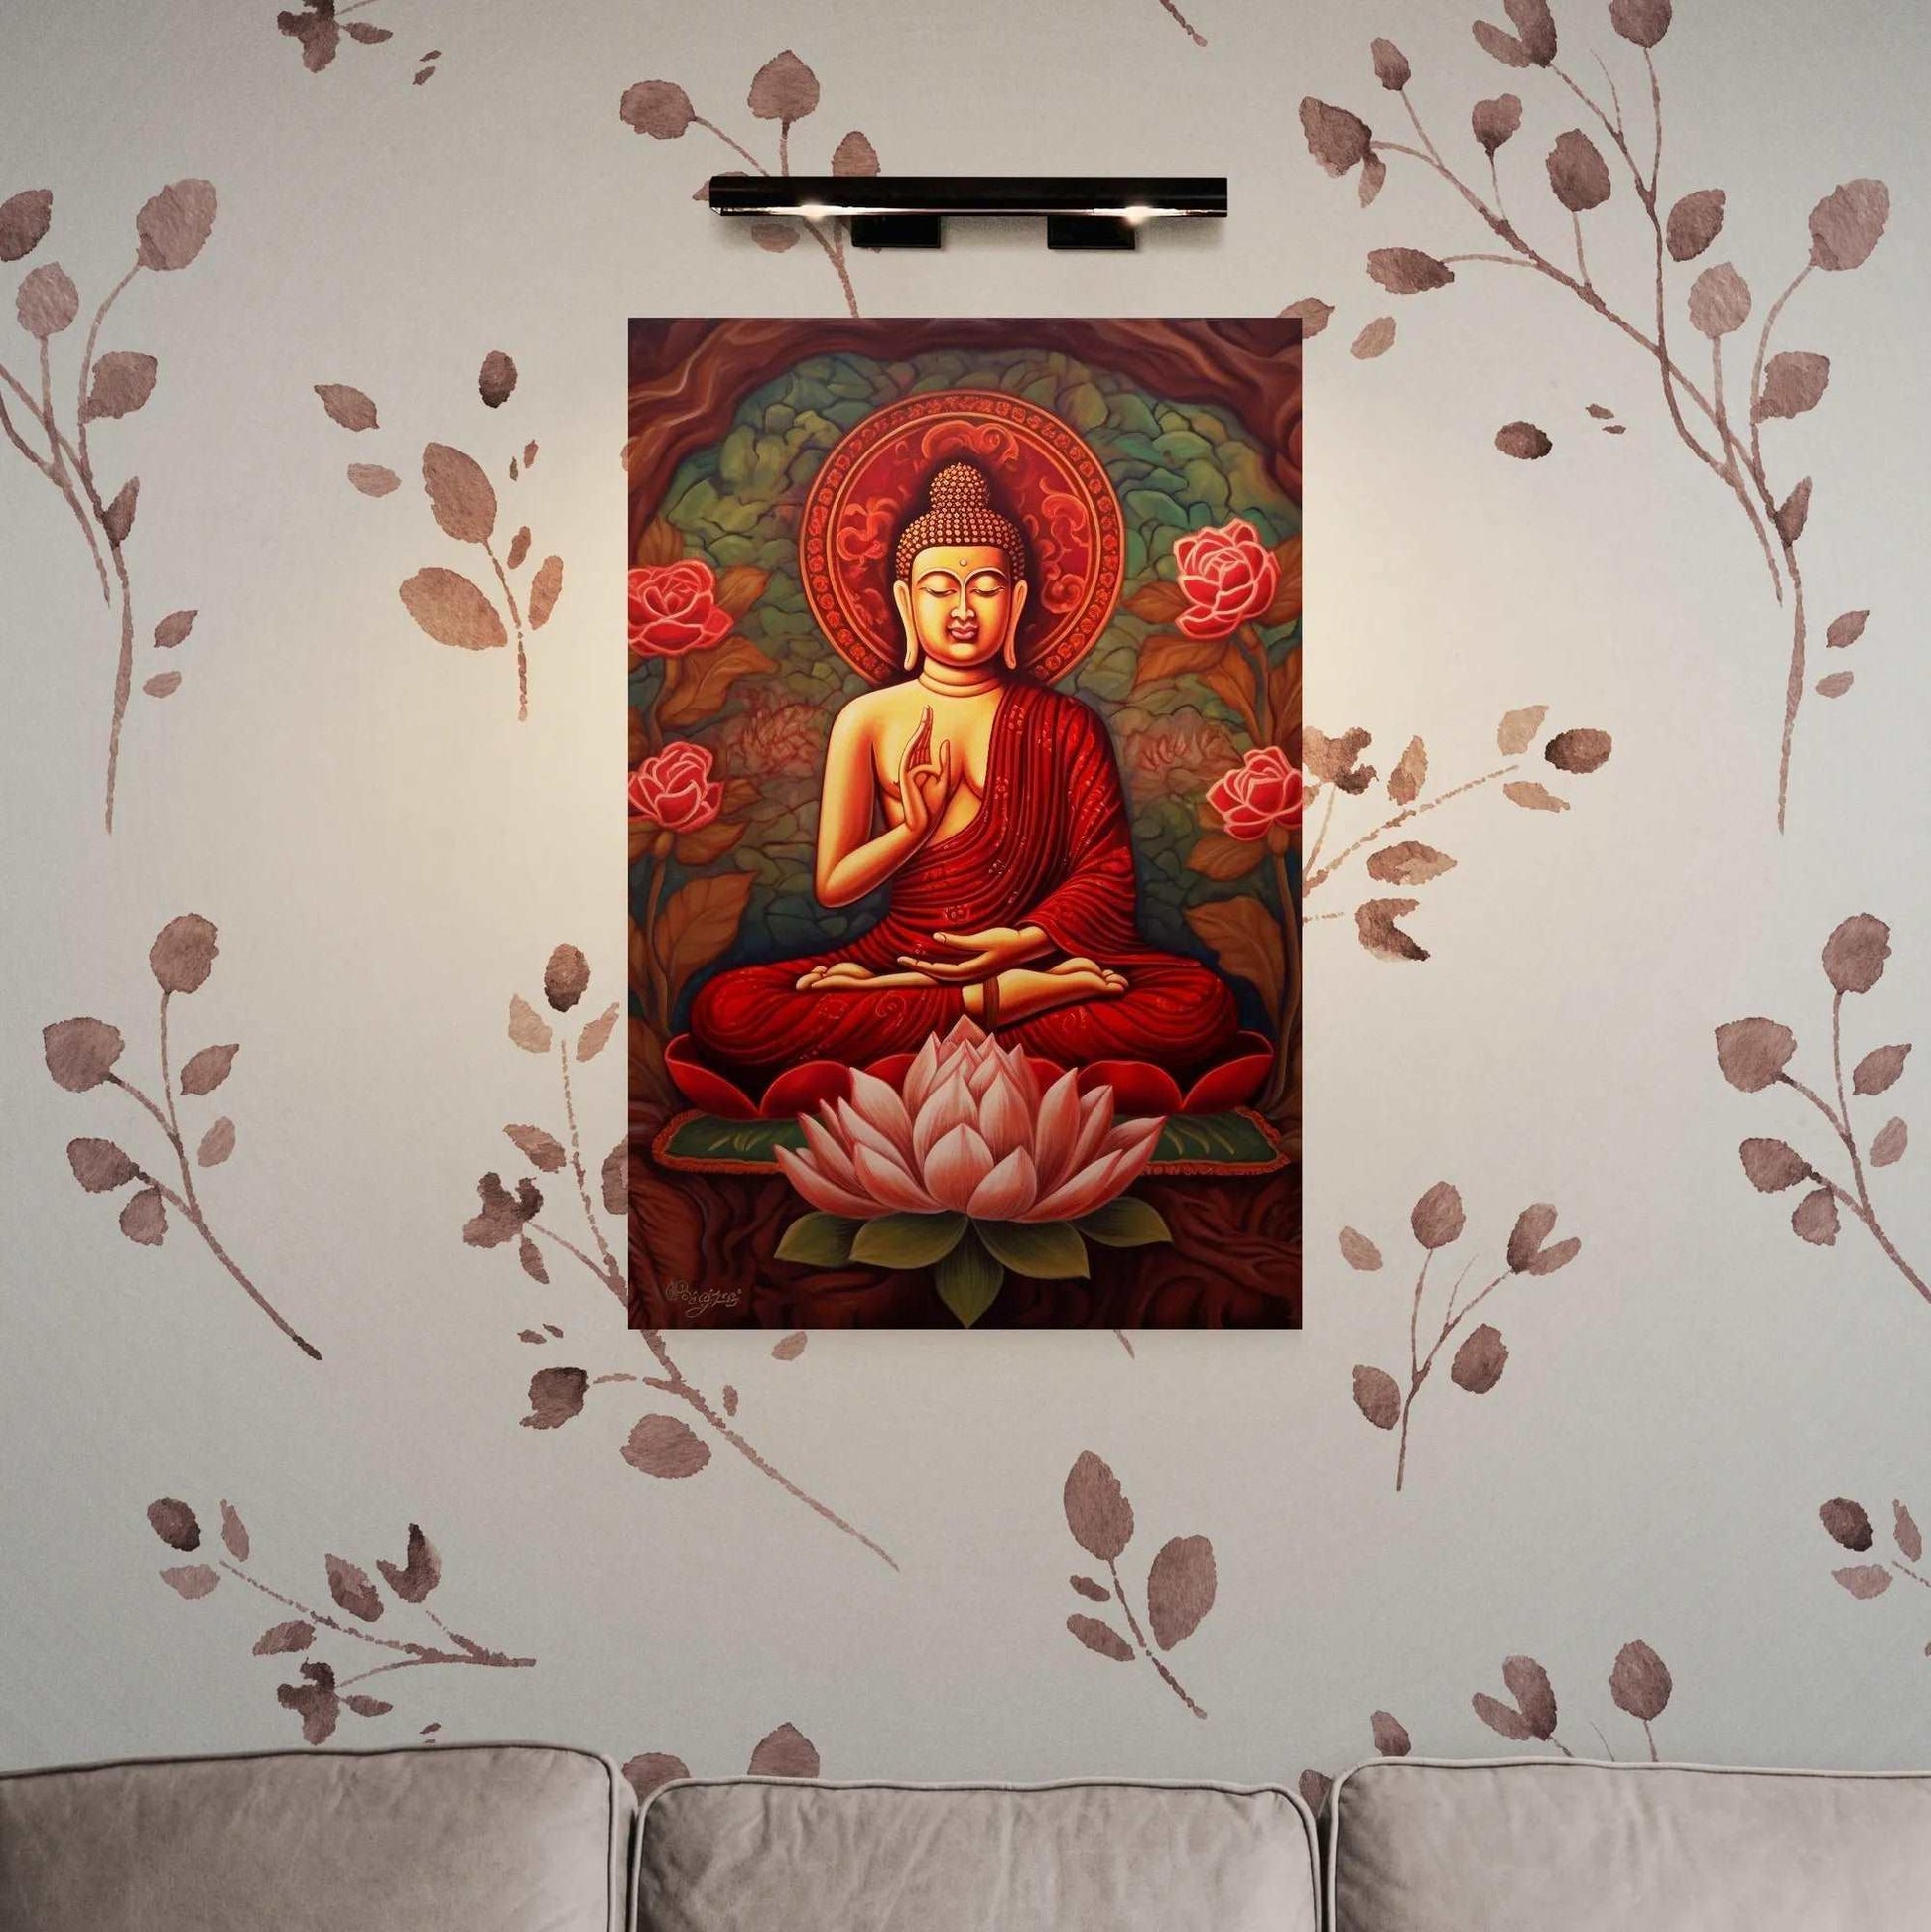 Warmly lit red and gold Buddha painting with roses and a lotus, creating a tranquil ambiance in a living room with leafy branch patterns on the walls and a soft couch.